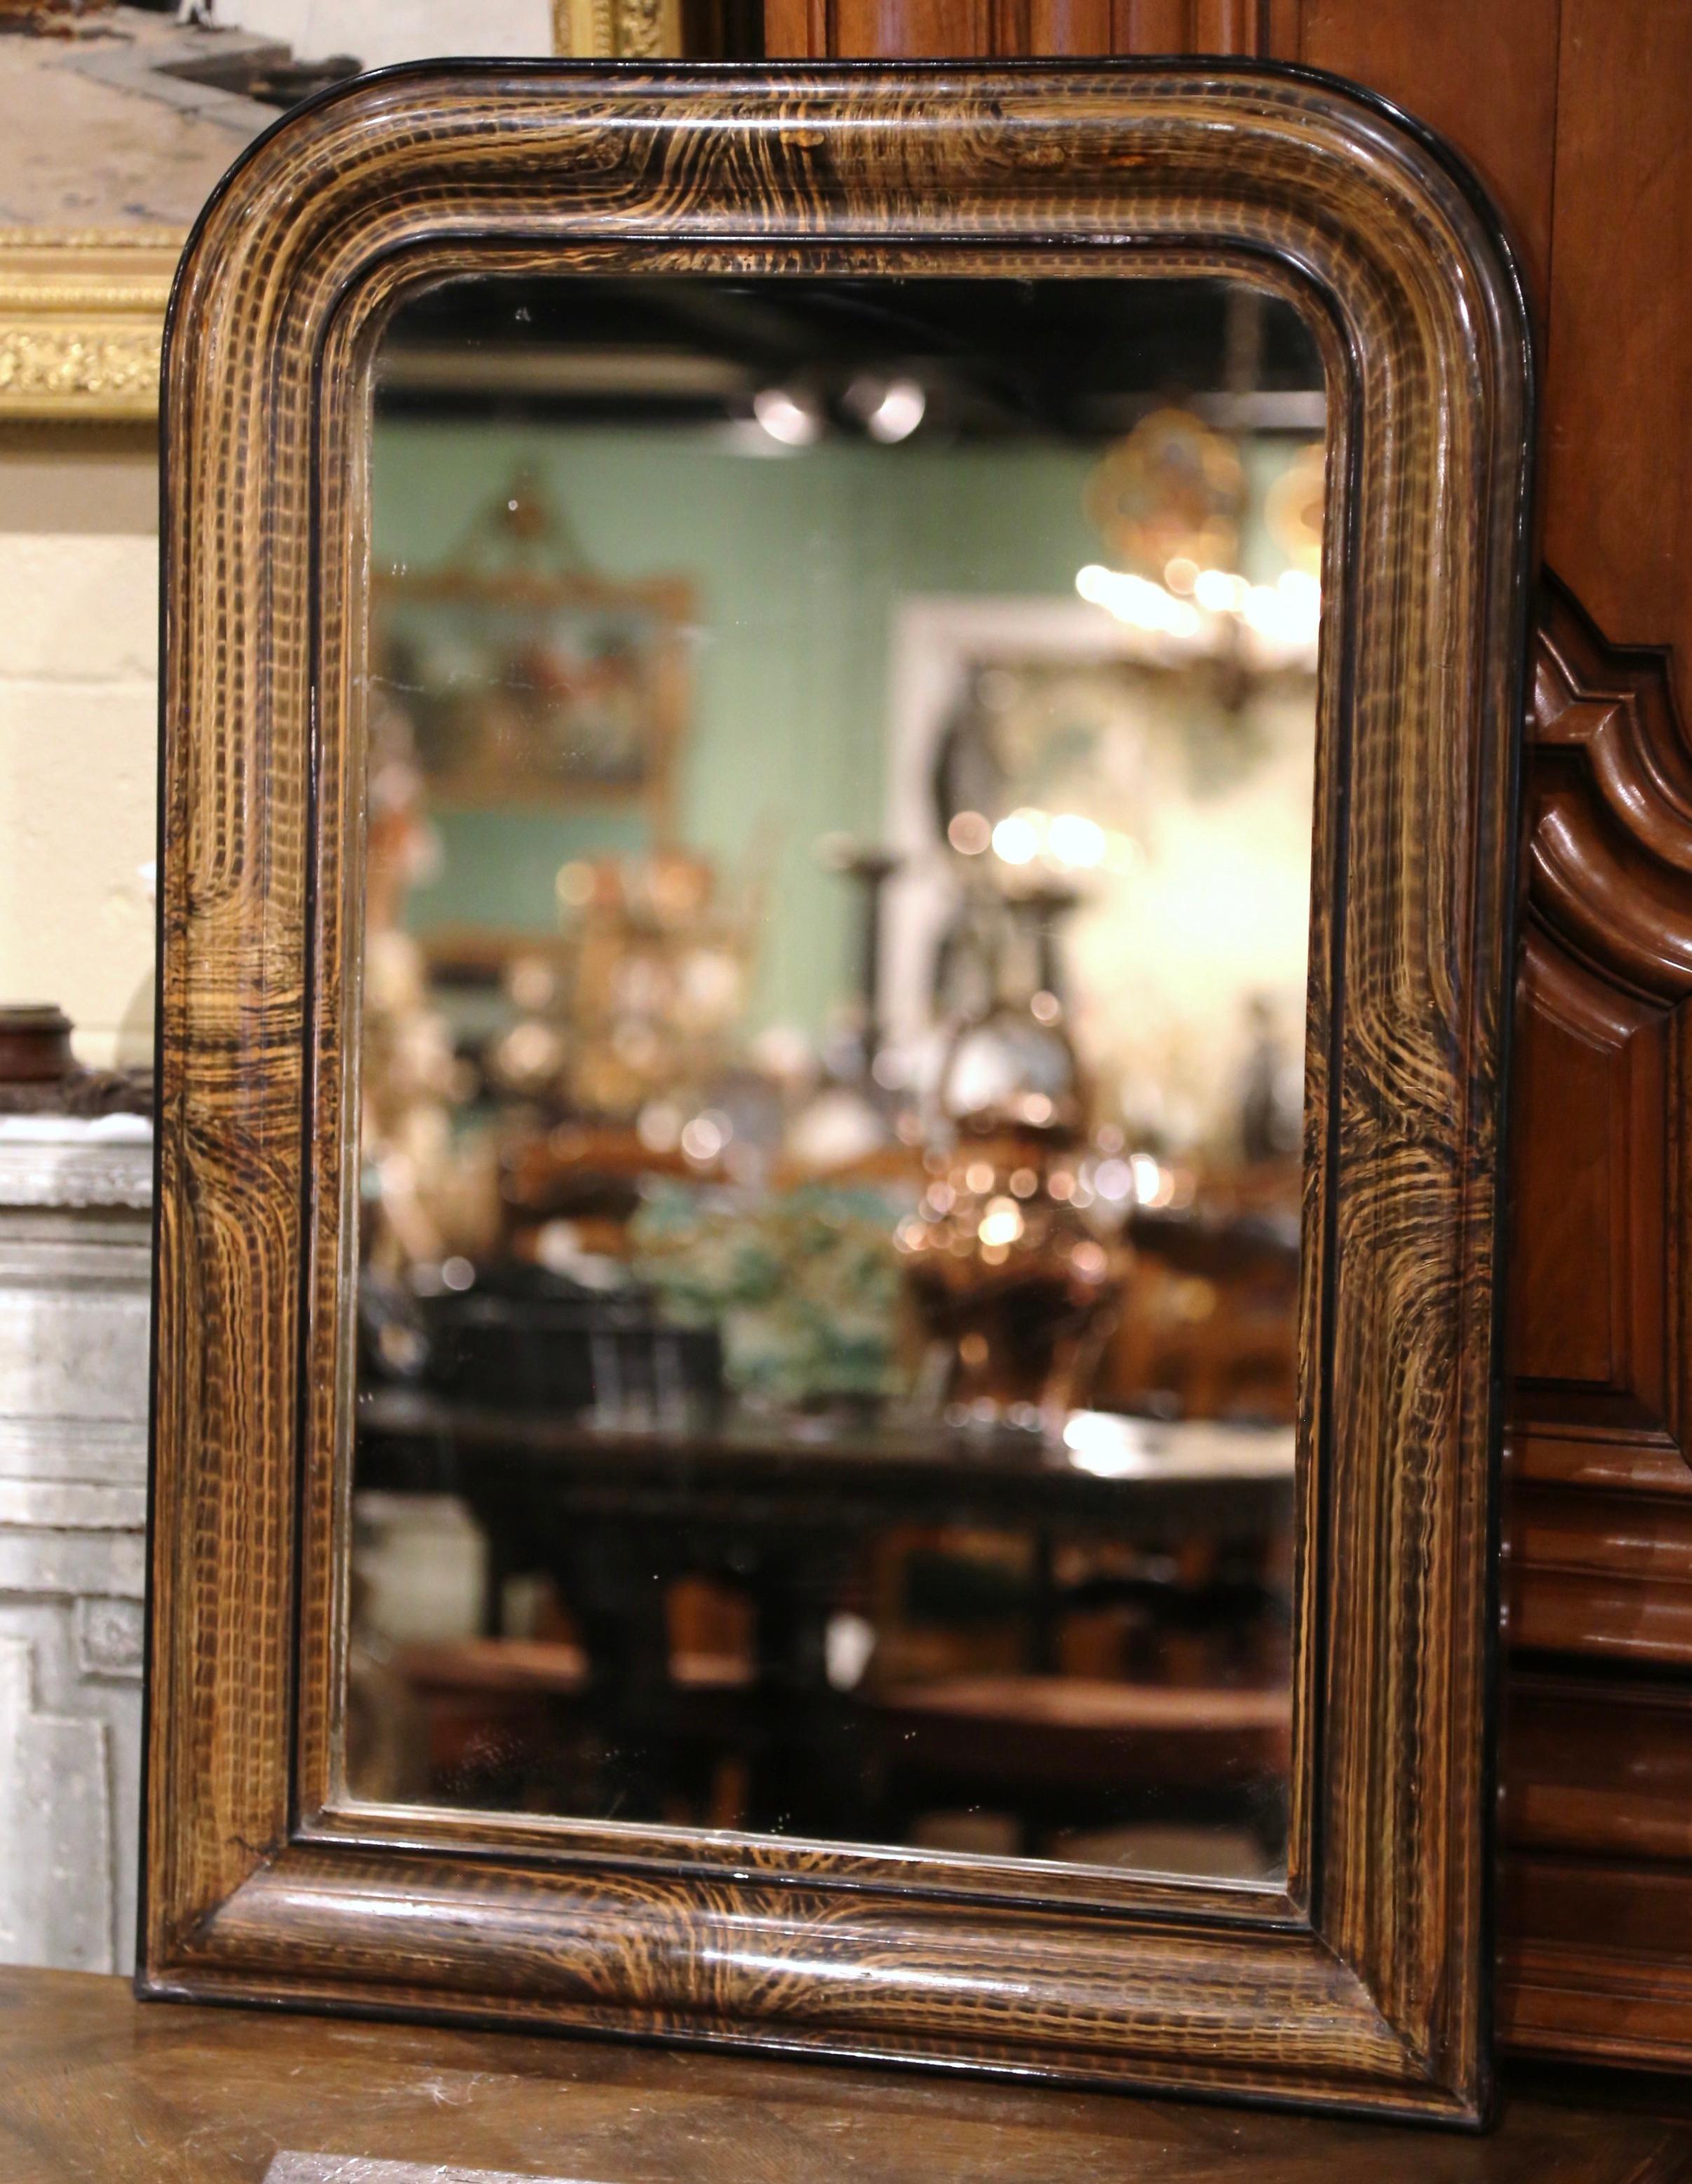 This elegant antique wall mirror was crafted in France, circa 1870. The frame with rounded corners is decorated with faux burl wood motifs in between patinated brown paint finish. The two-tone Louis Philippe style mirror is in excellent condition